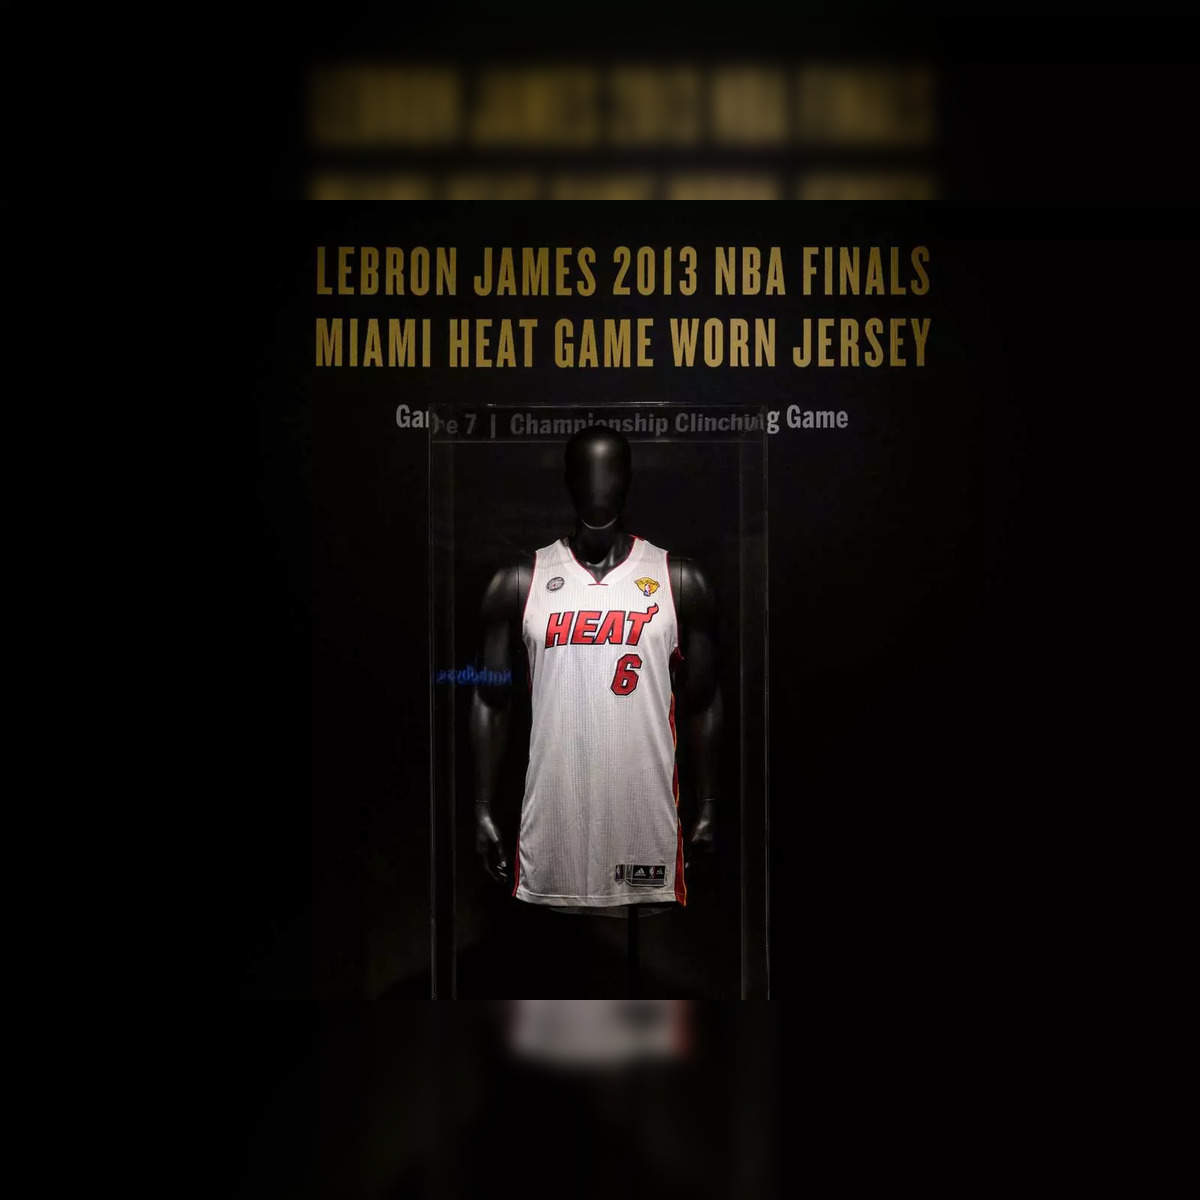 LeBron James 2013 NBA Finals Miami Heat Game Worn Jersey, Game 7, Championship Clinching Game, The One, 2023